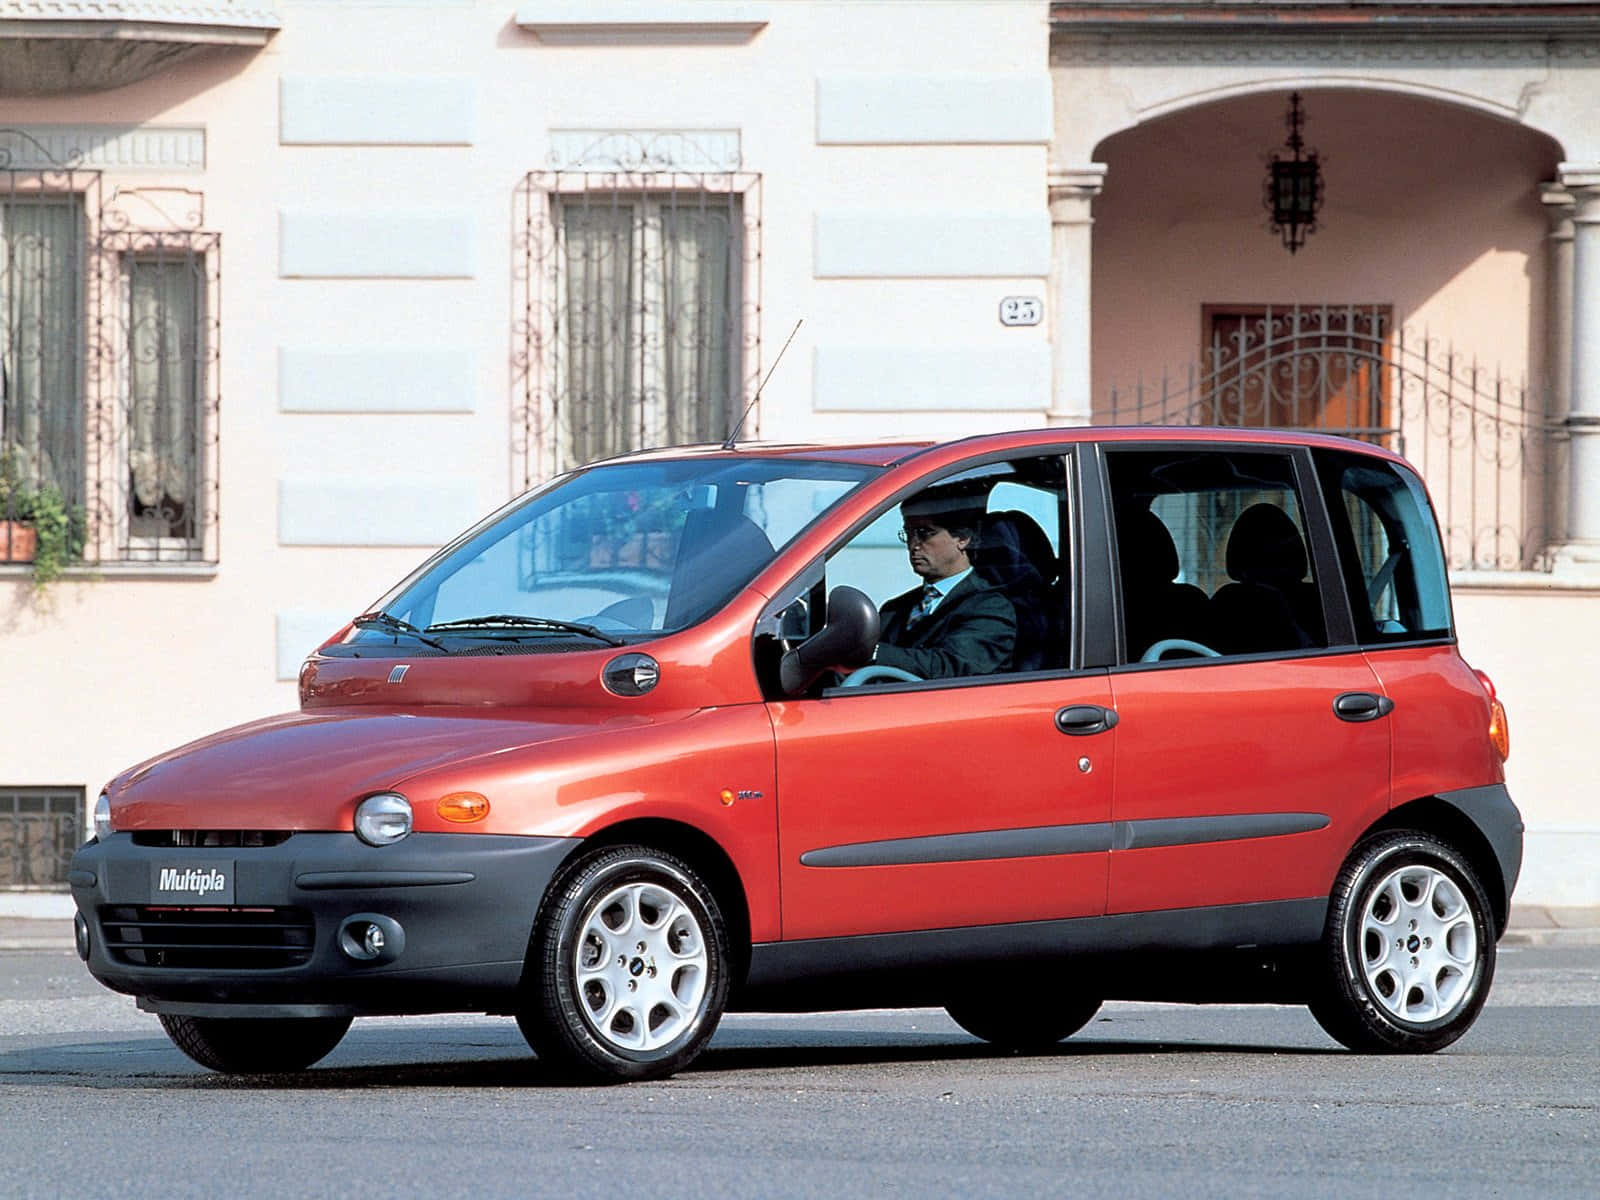 Vintage Fiat Multipla In A City Setting Wallpaper